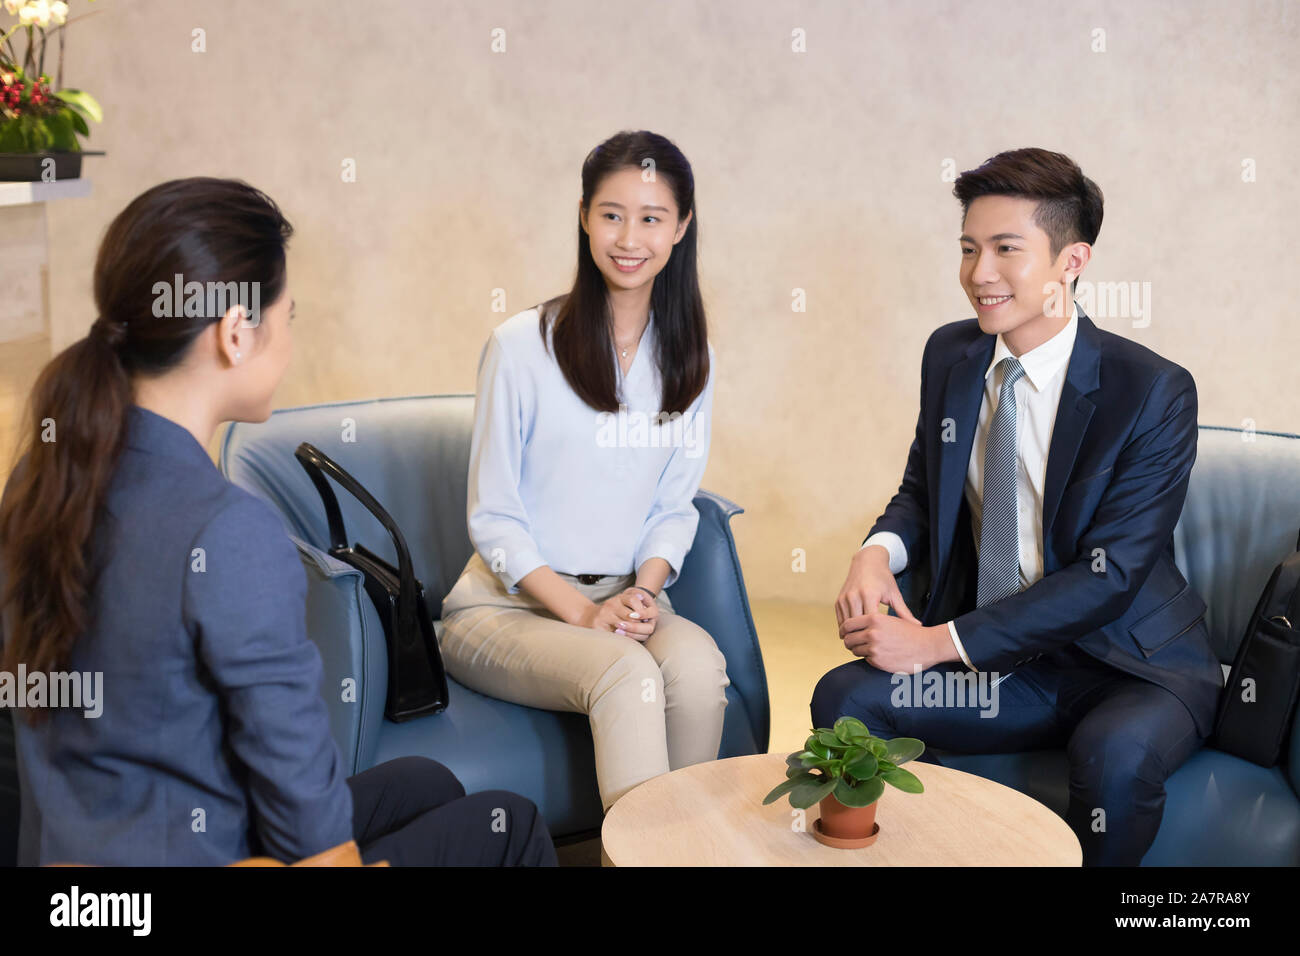 Photograph of a group of three smiling young male and female businesspeople talking together during a meeting Stock Photo